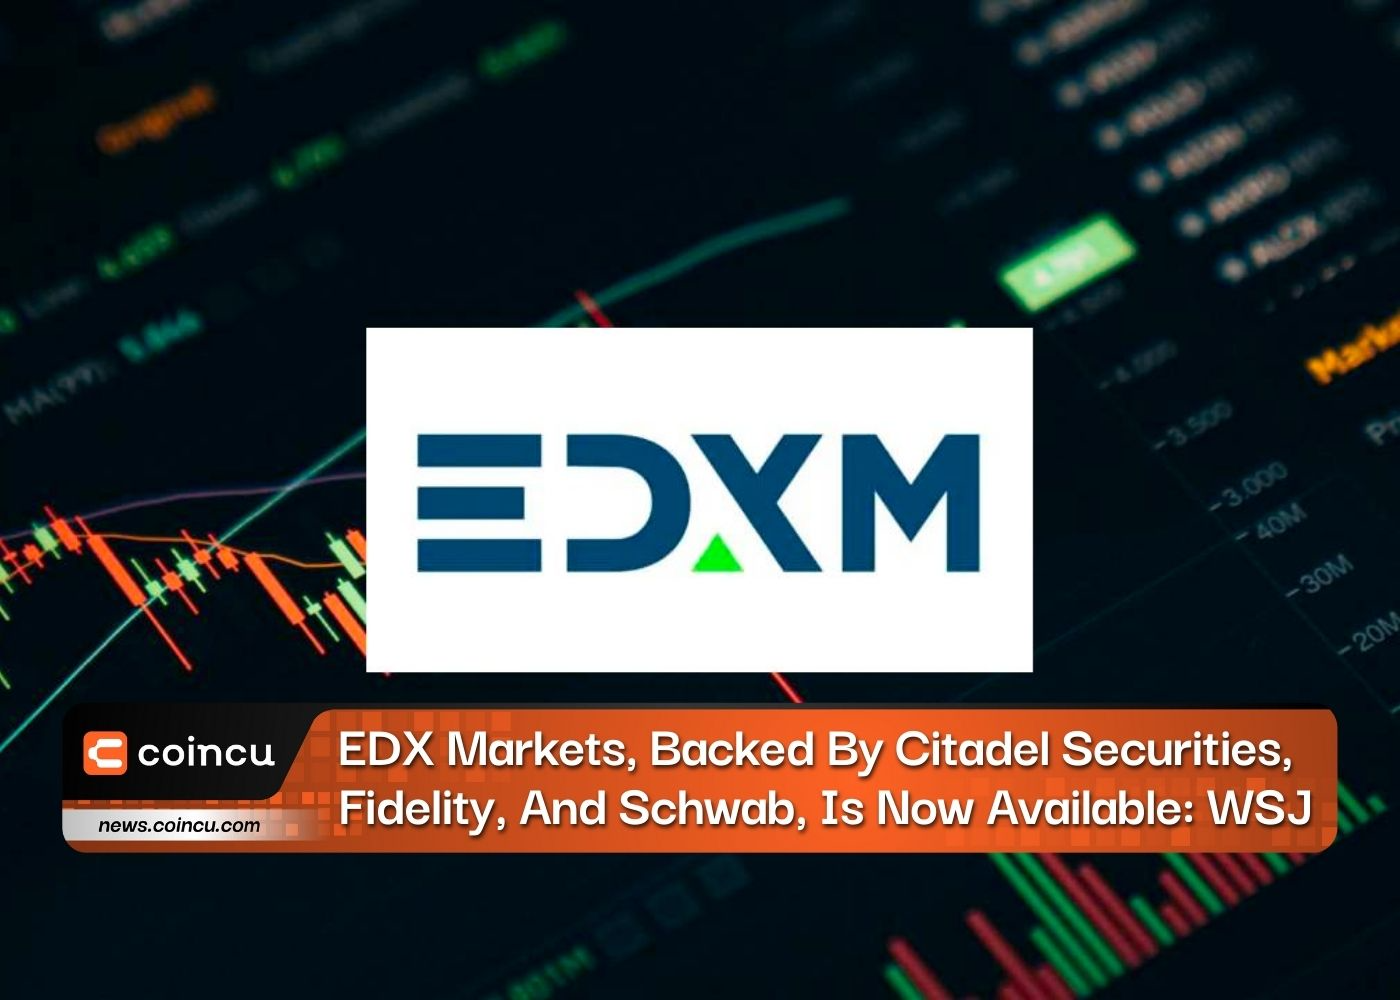 EDX Markets, Backed By Citadel Securities, Fidelity, And Schwab, Is Now Available: WSJ